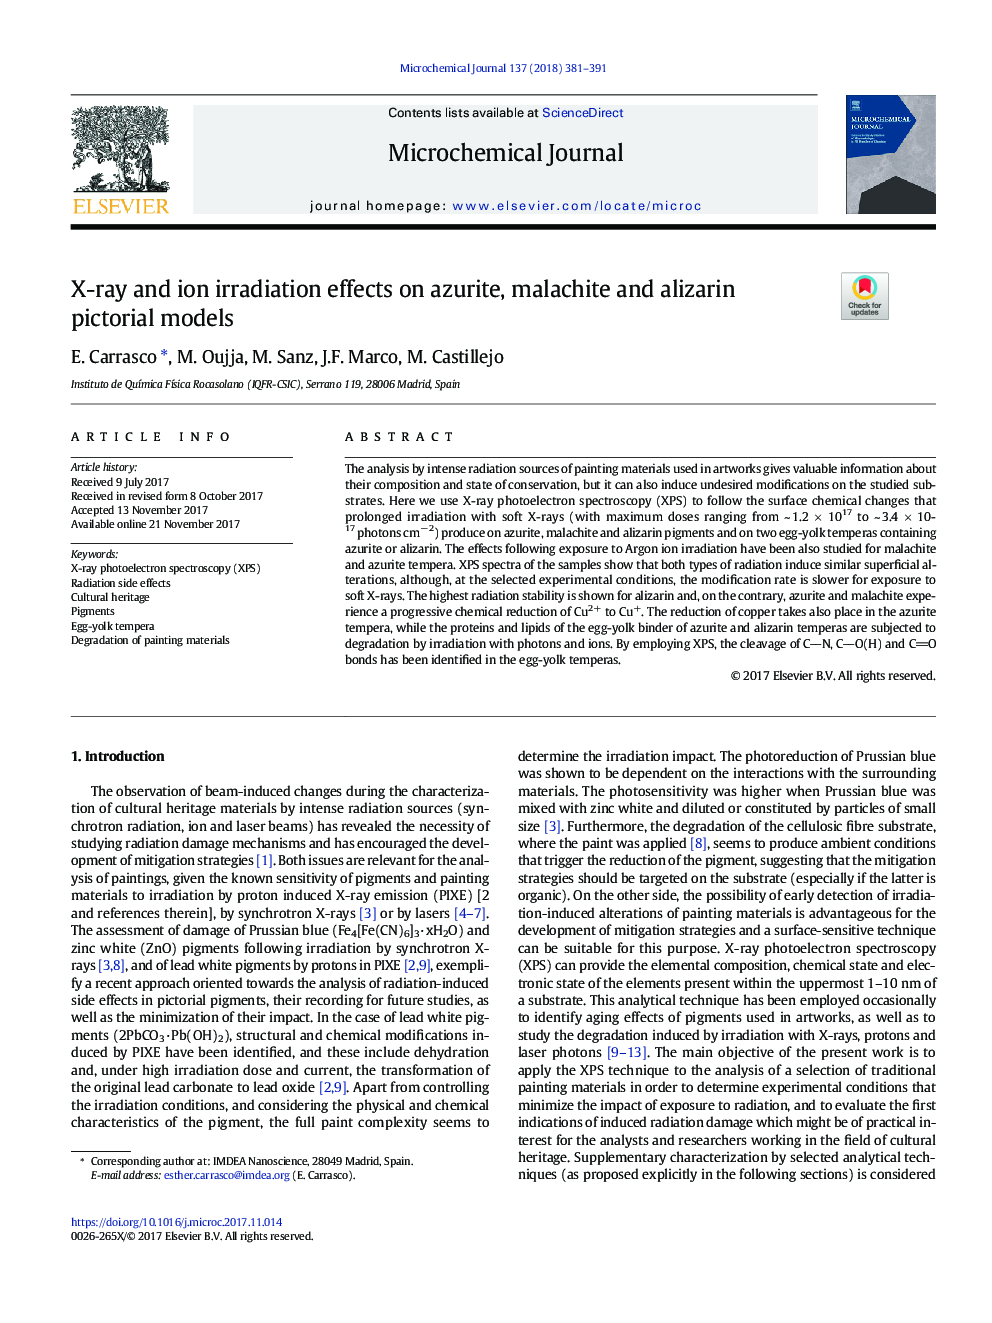 X-ray and ion irradiation effects on azurite, malachite and alizarin pictorial models